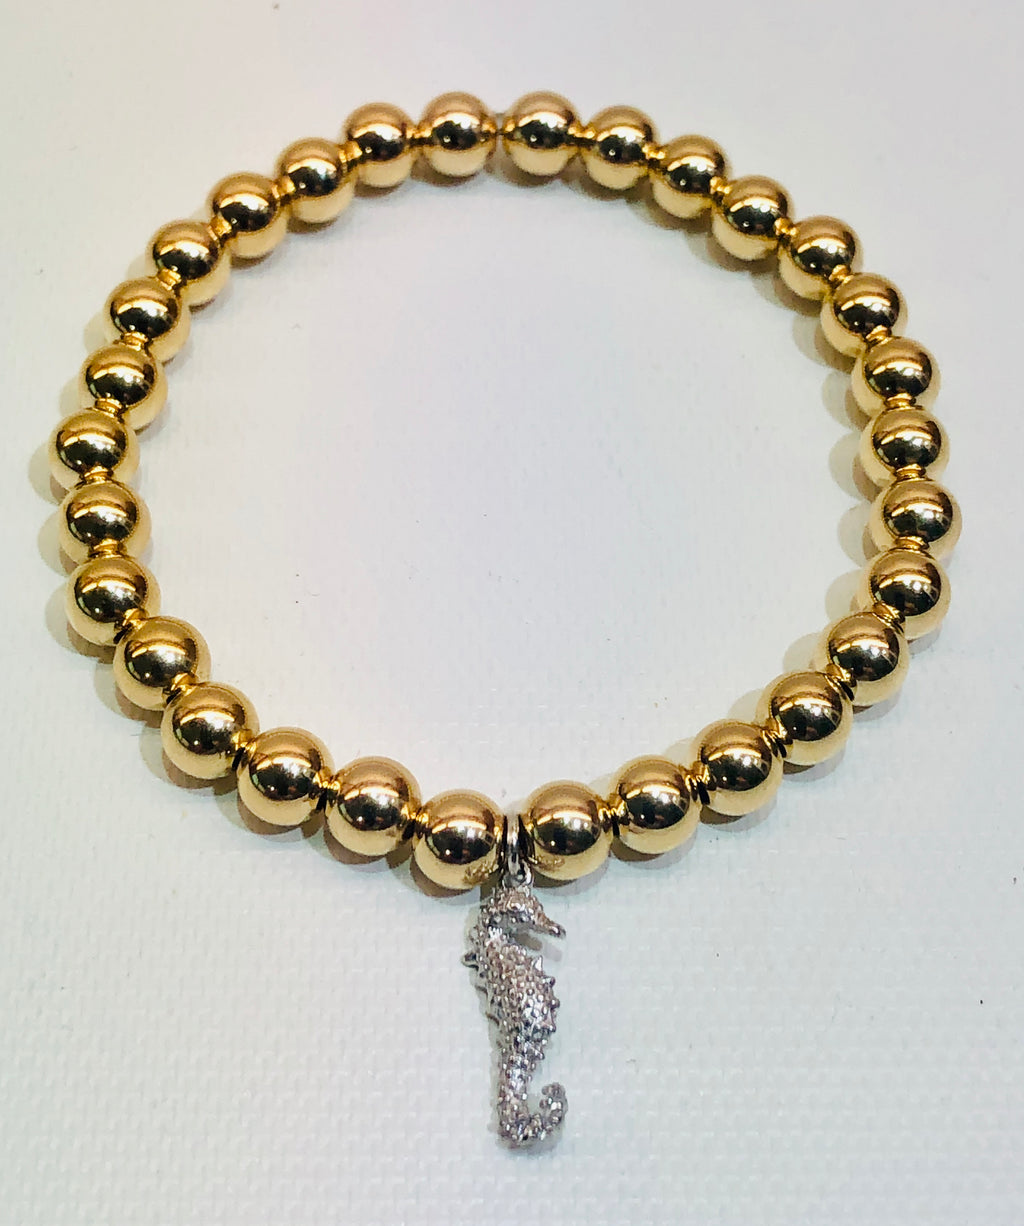 6mm 14kt Gold Filled Bead Bracelet with Silver Seahorse